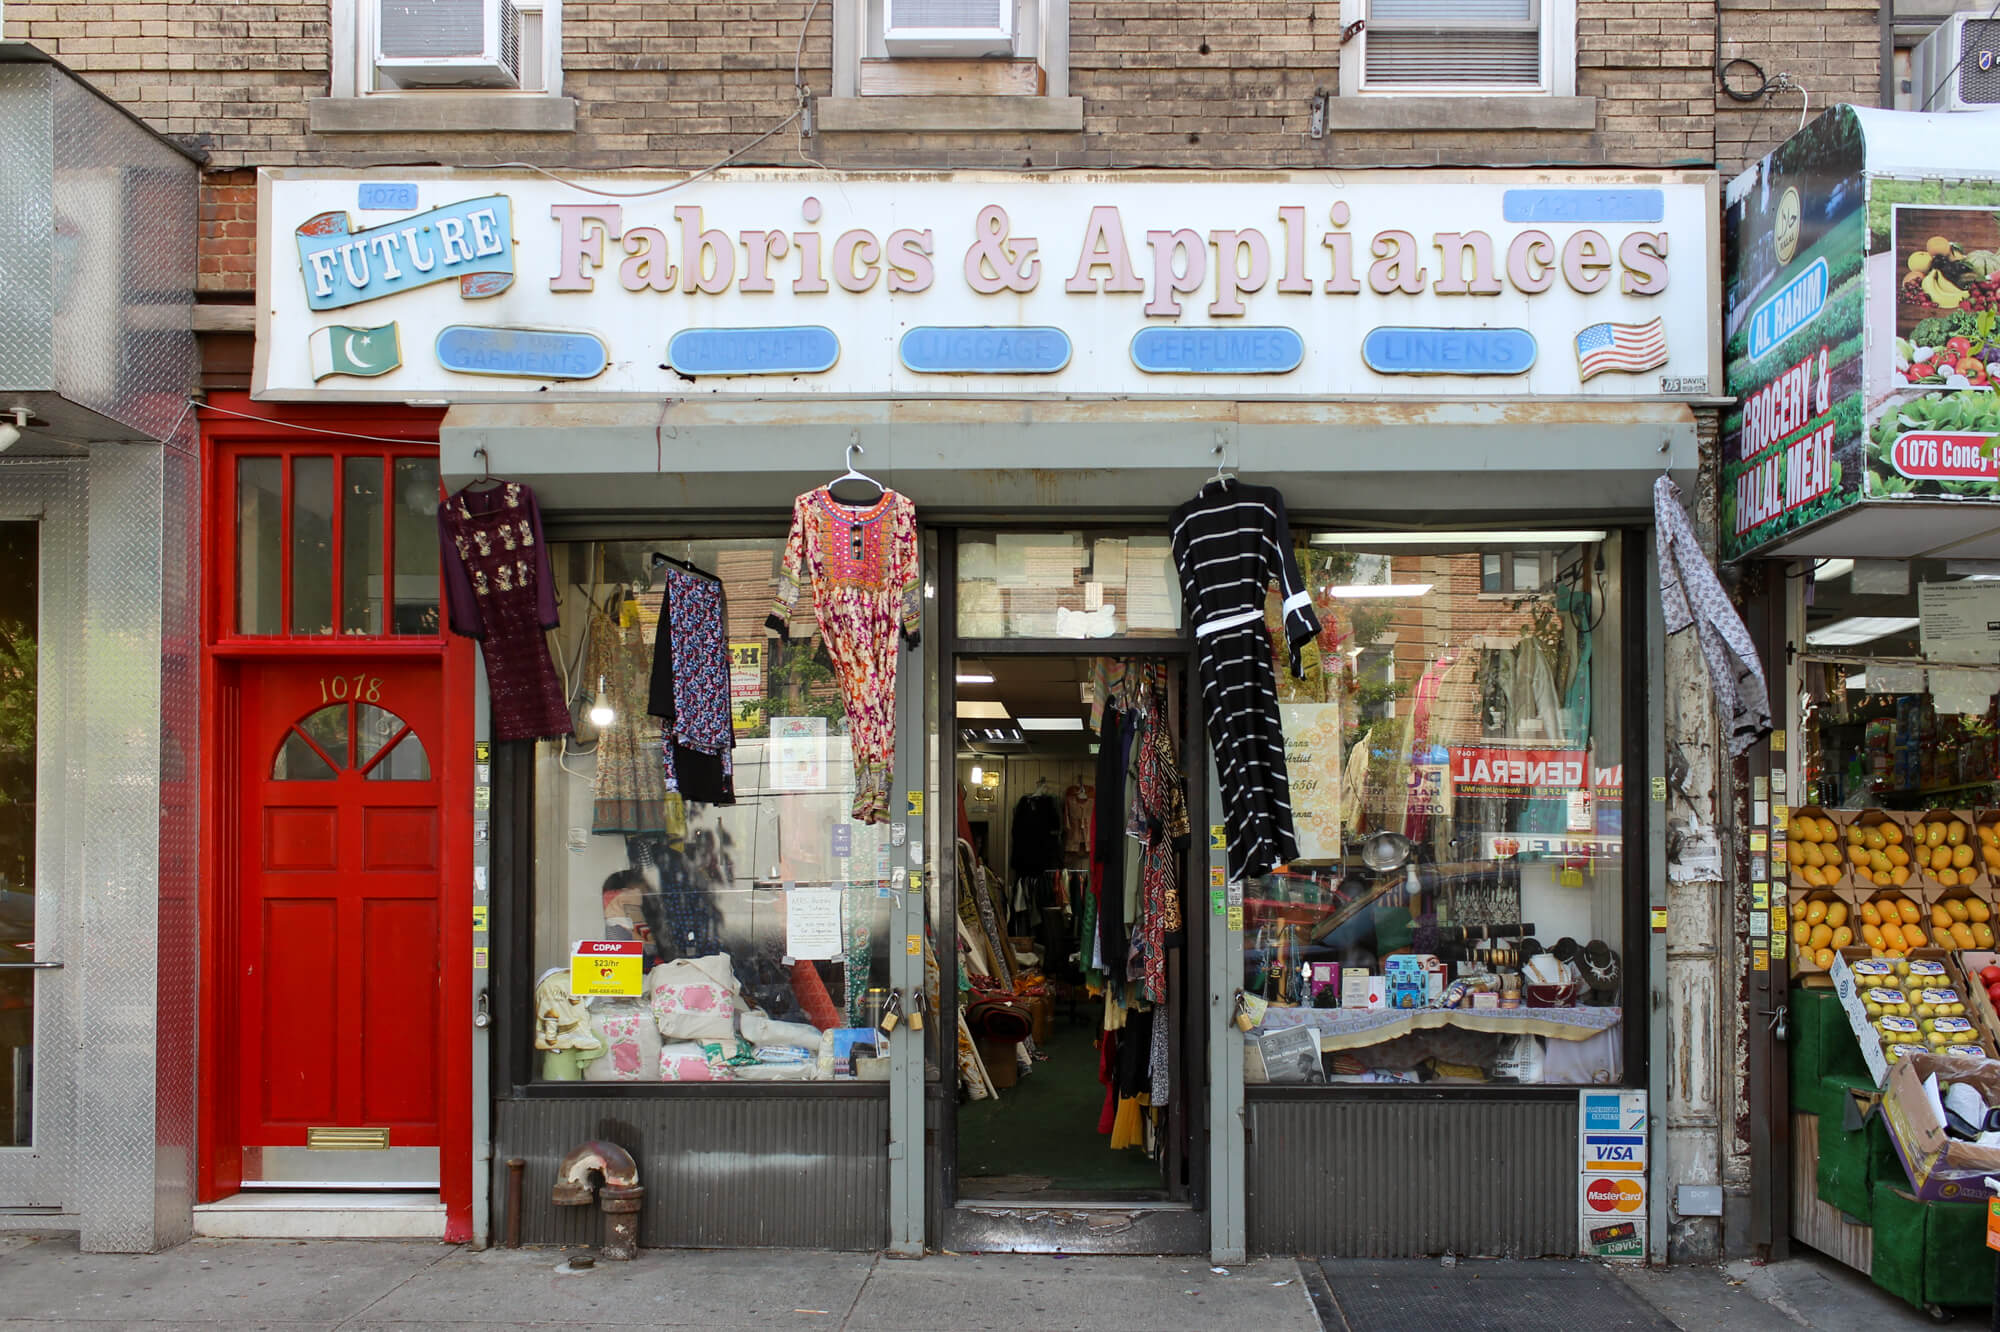 the exterior of future fabrics and appliances